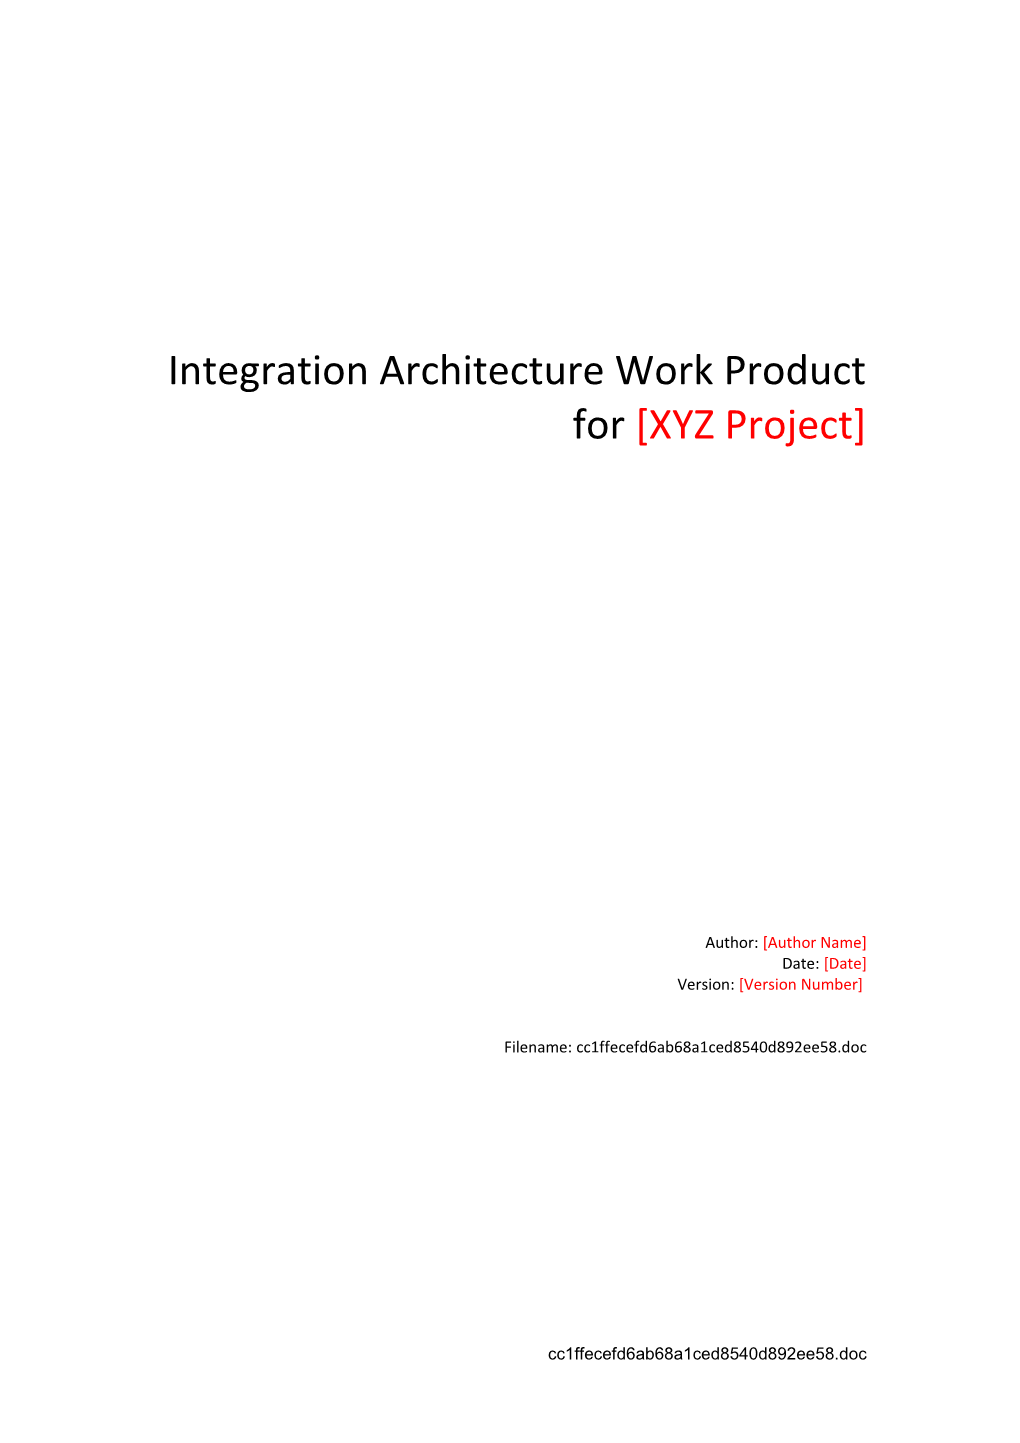 Architecture Scope and Context Work Product